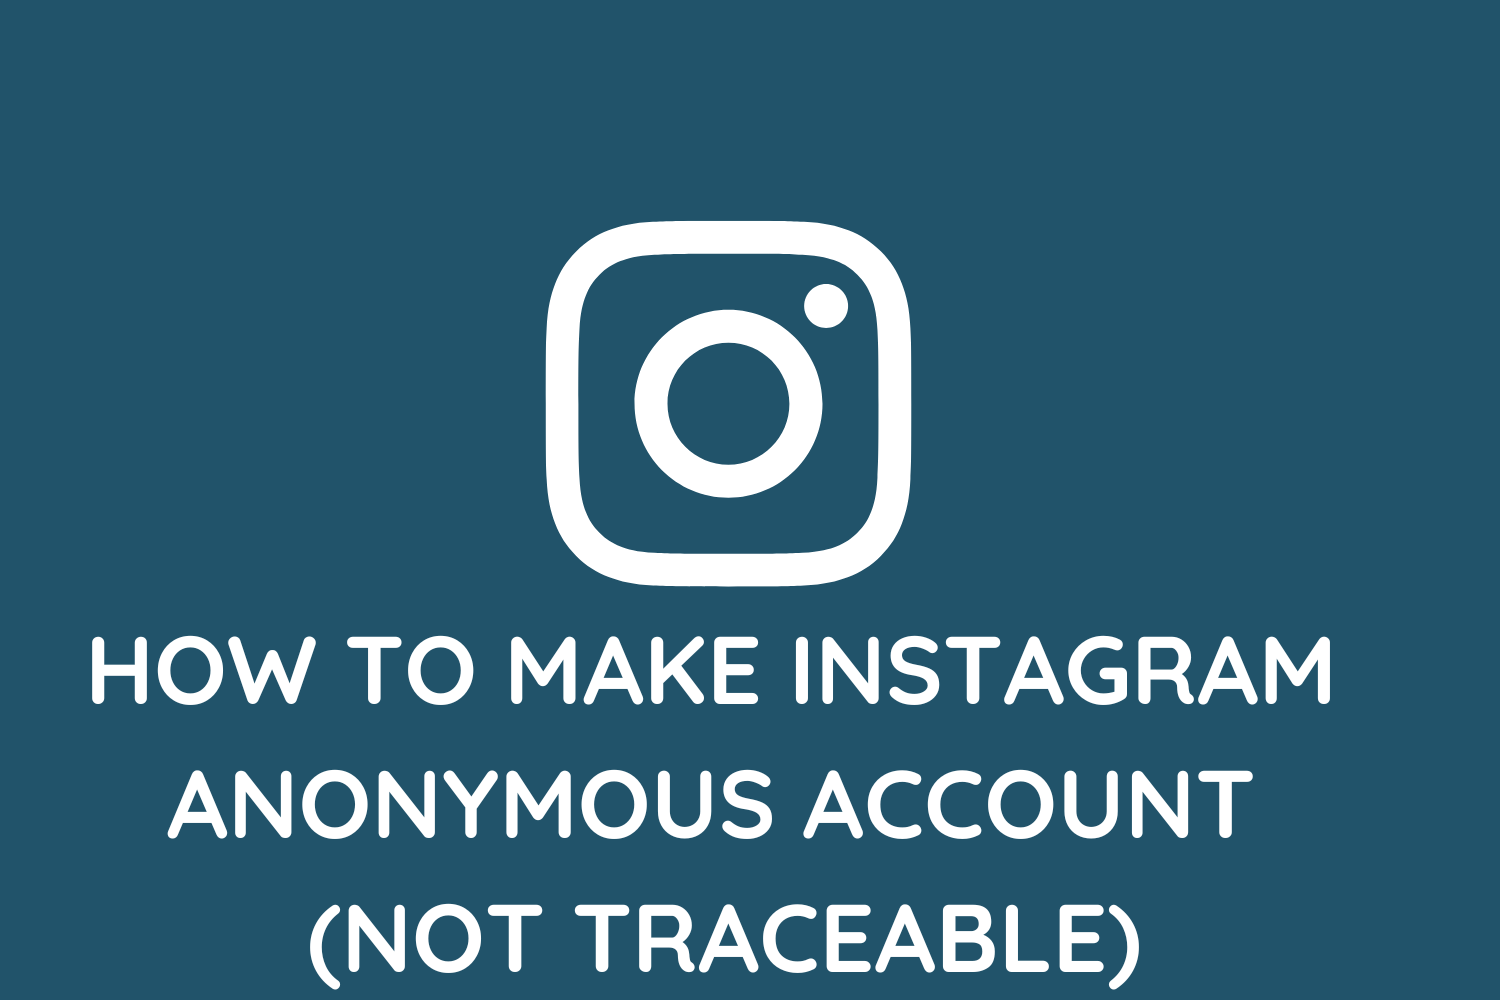 How To Make Instagram Anonymous Account (Not Traceable)